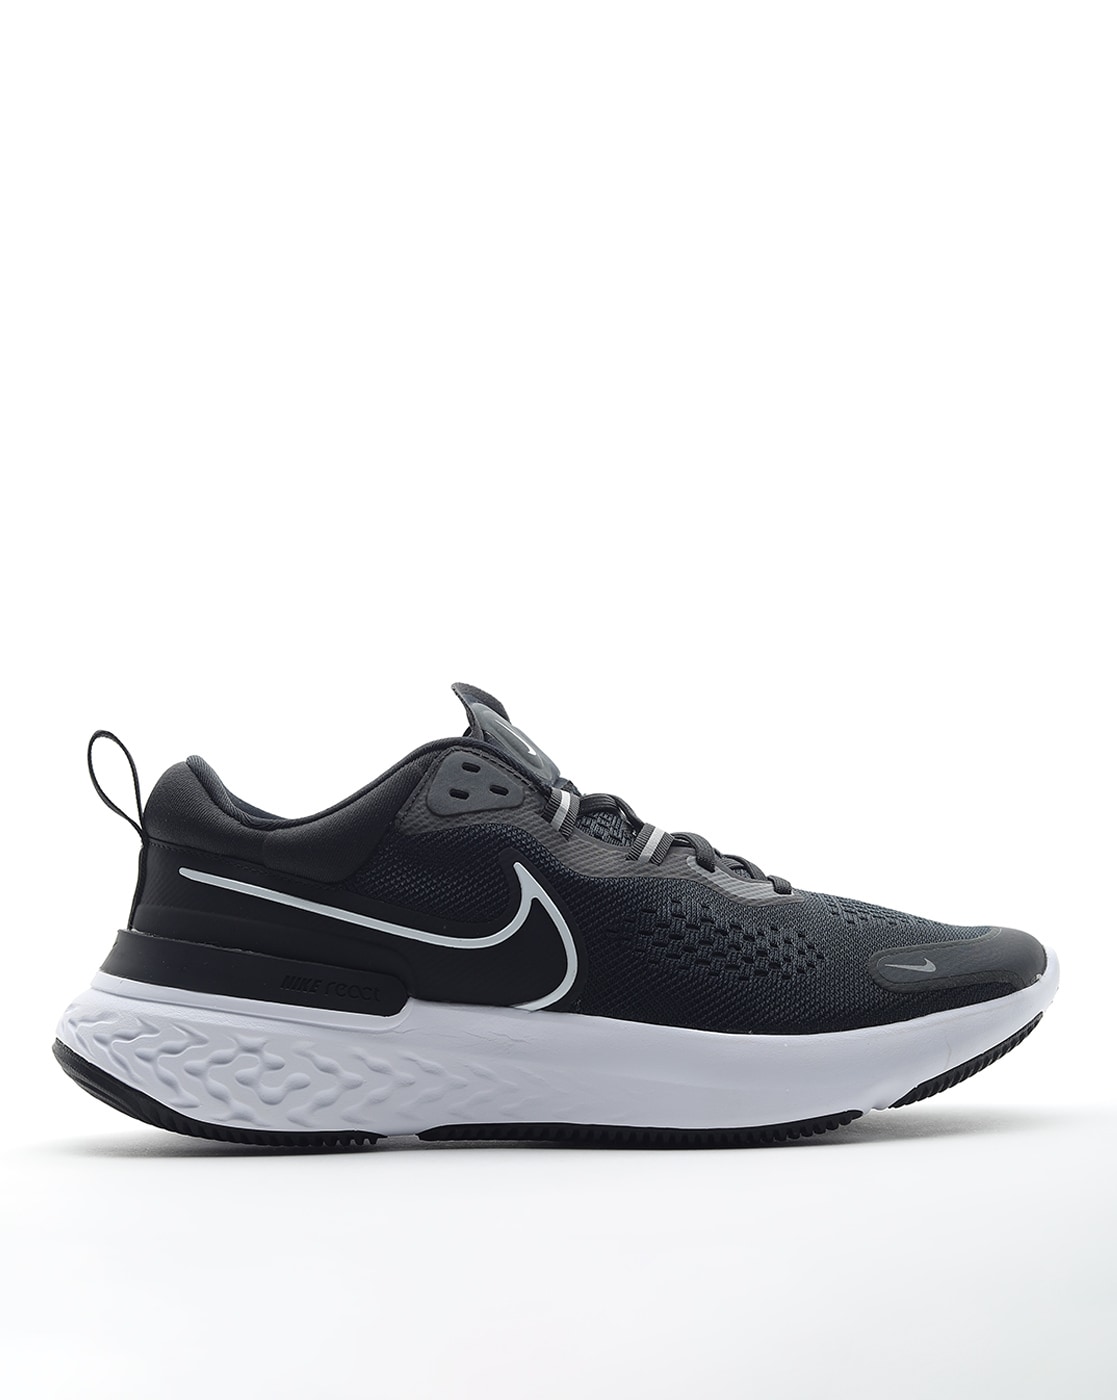 Nike Mens React Miler Running Shoes CW7121 200 | mail.napmexico.com.mx